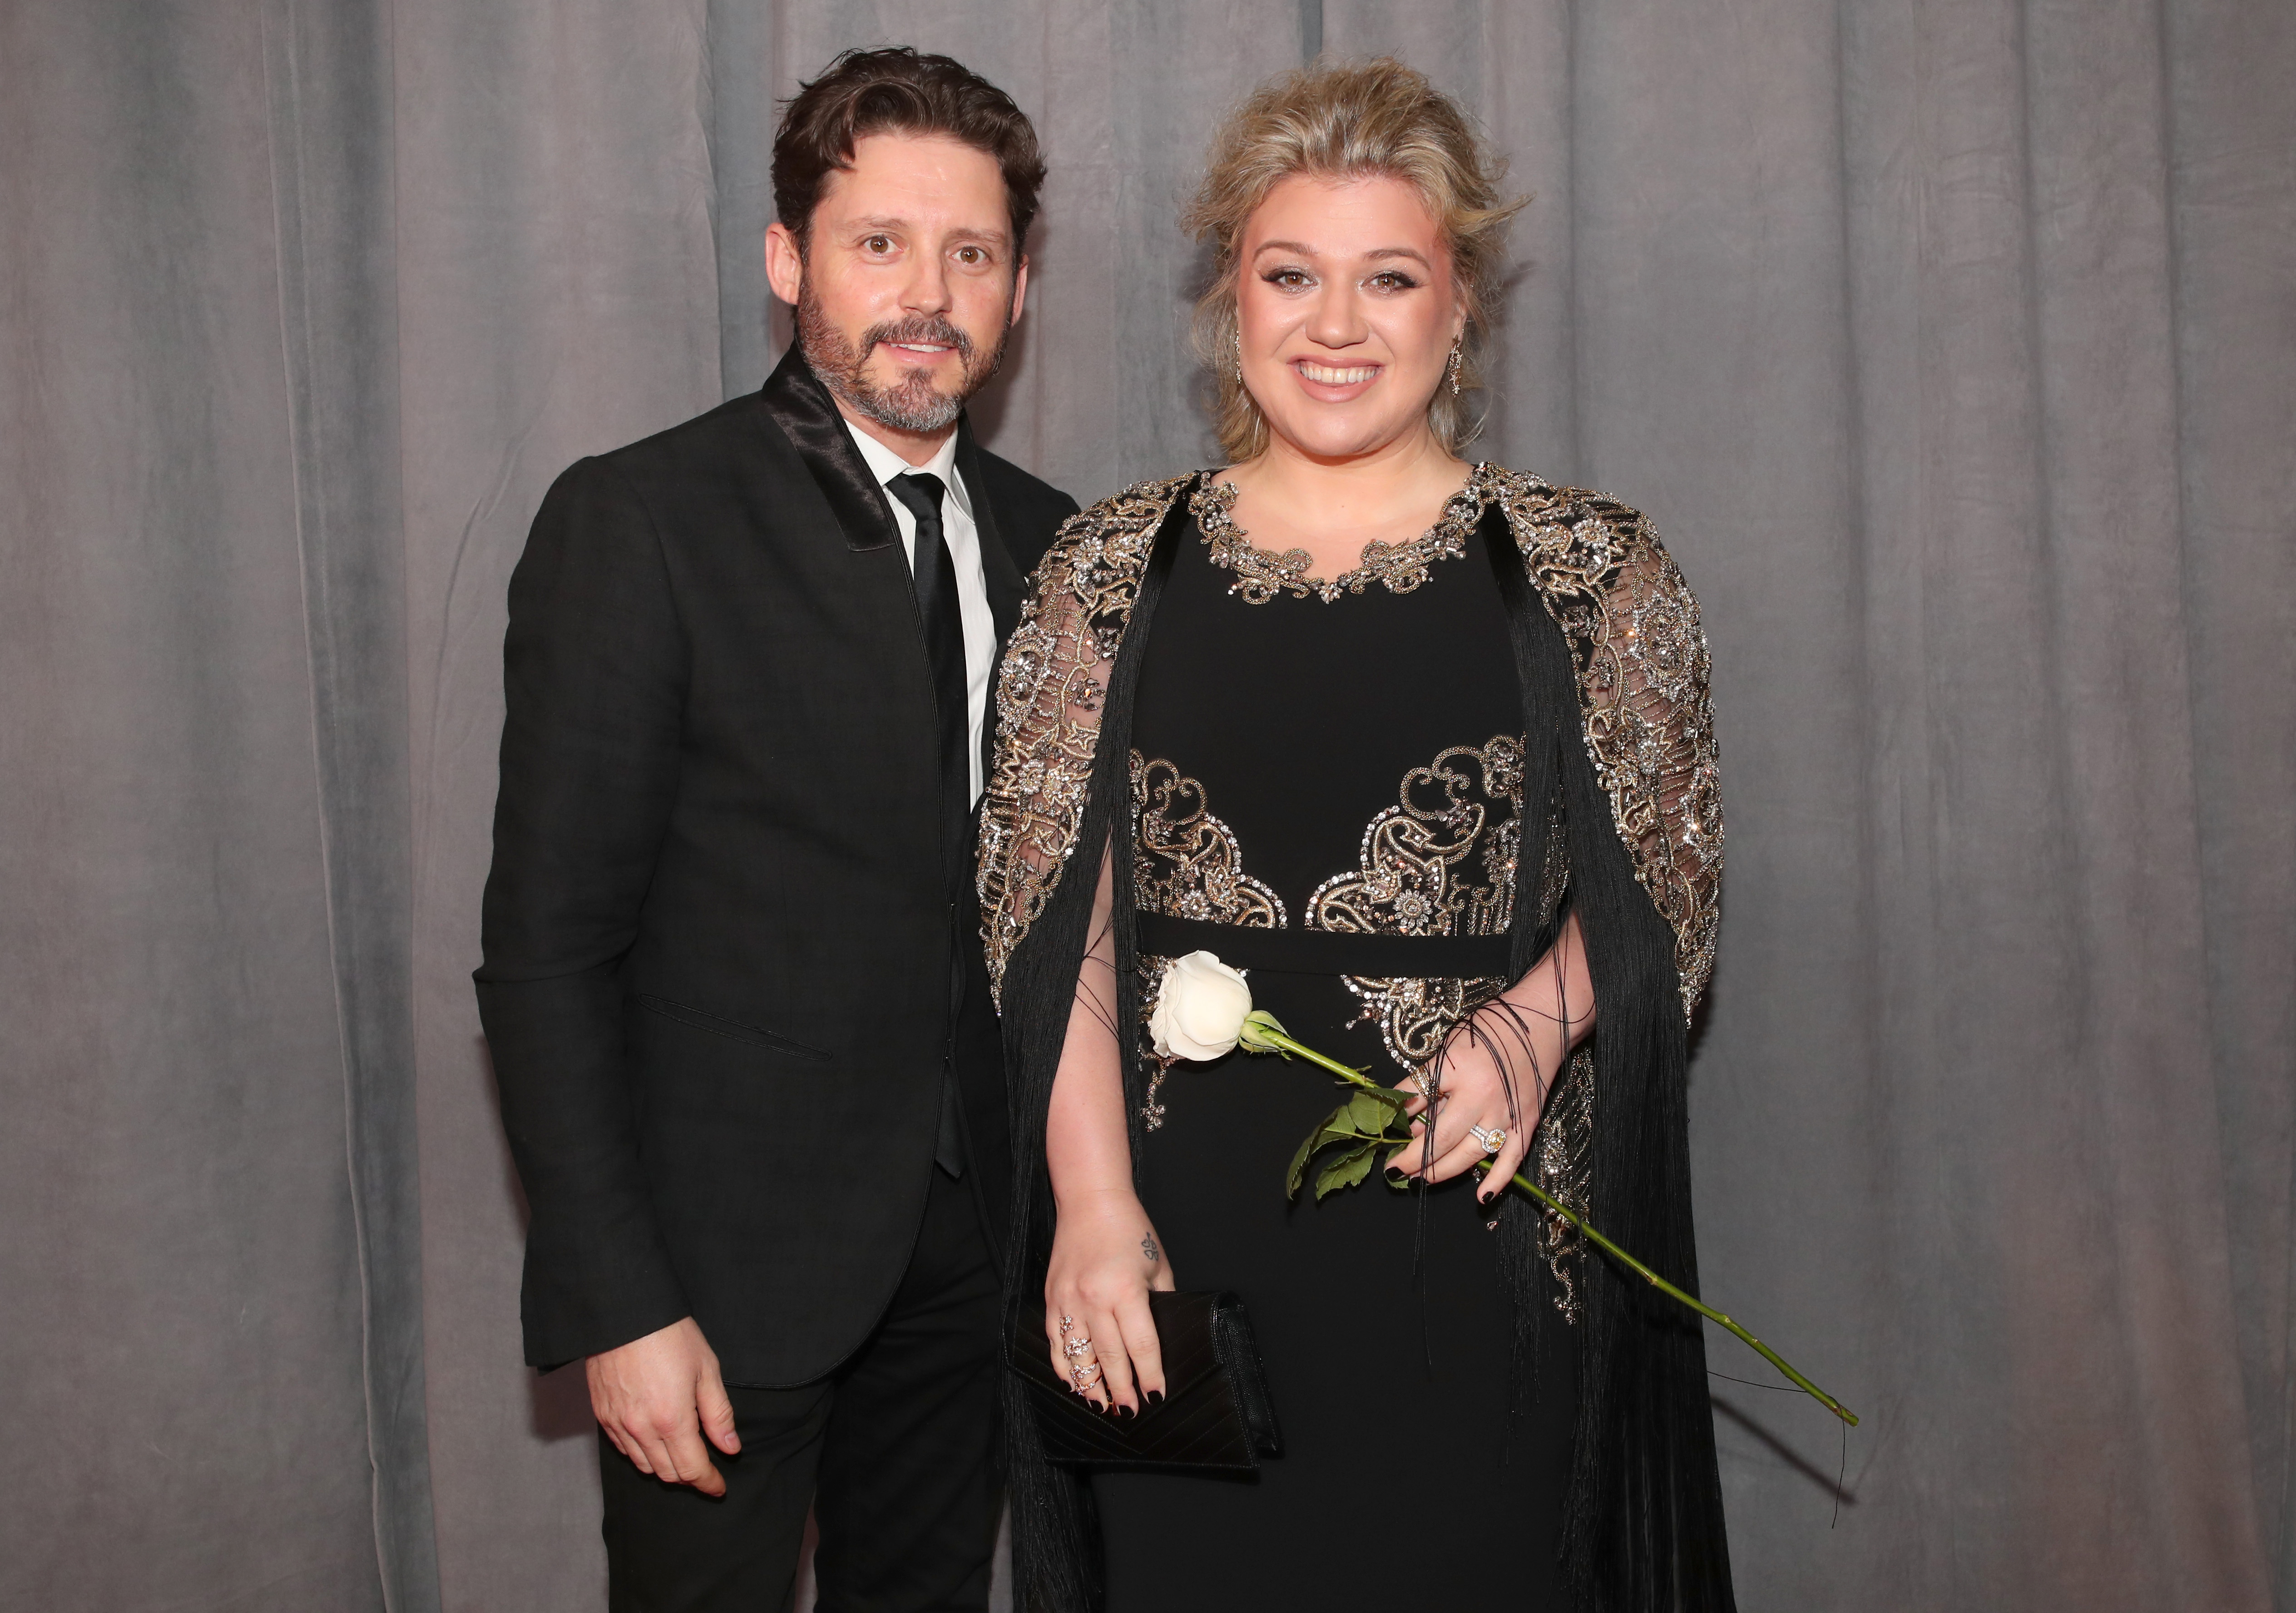 Scandals 2020: Brandon Blackstock and Kelly Clarkson